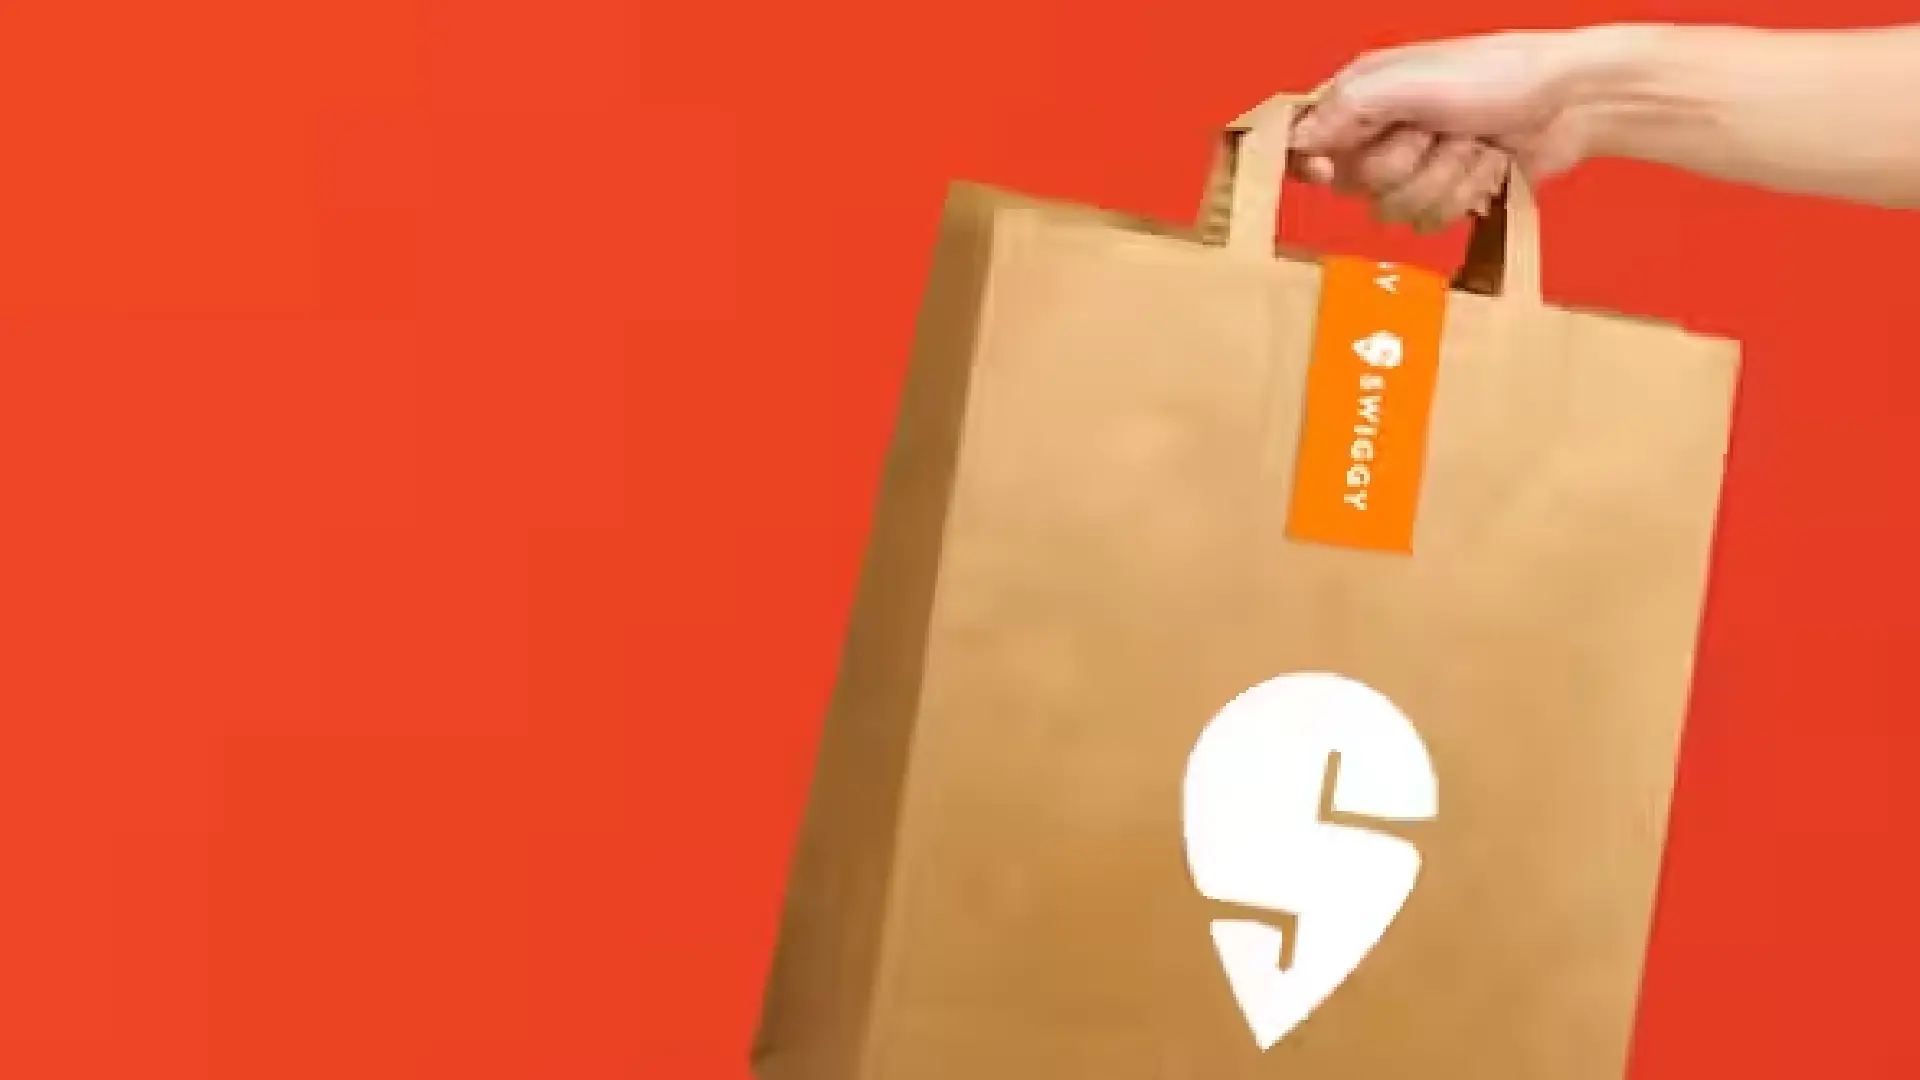 Swiggy One Lite Membership for ₹6 (Almost Free!) with Dineout Booking Trick